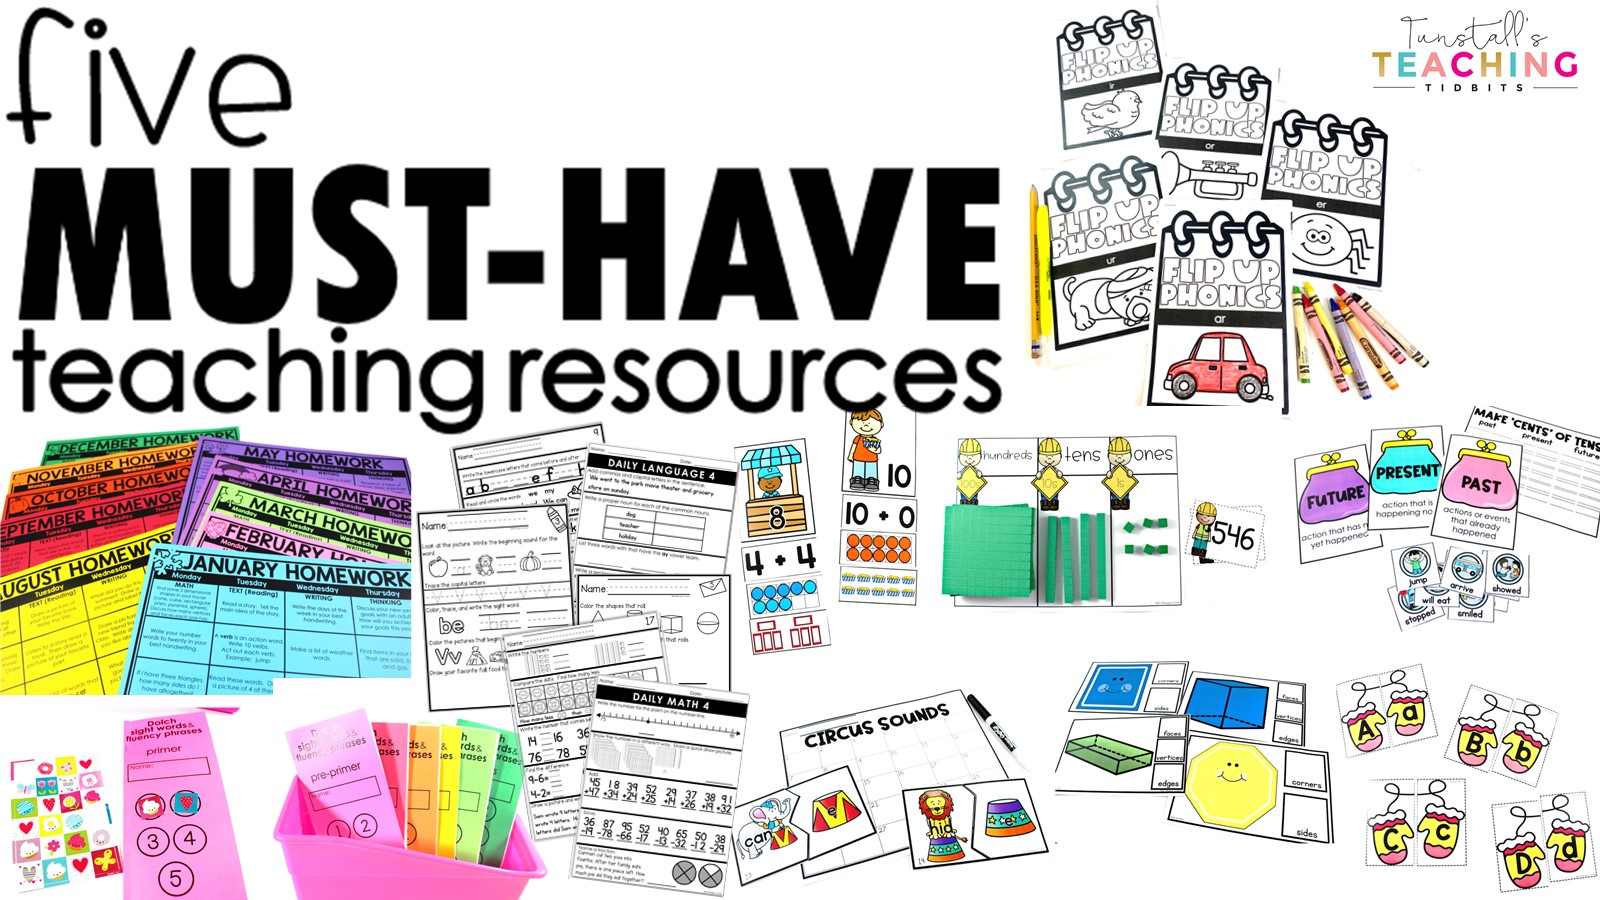 Five Must-Have Teaching Resources